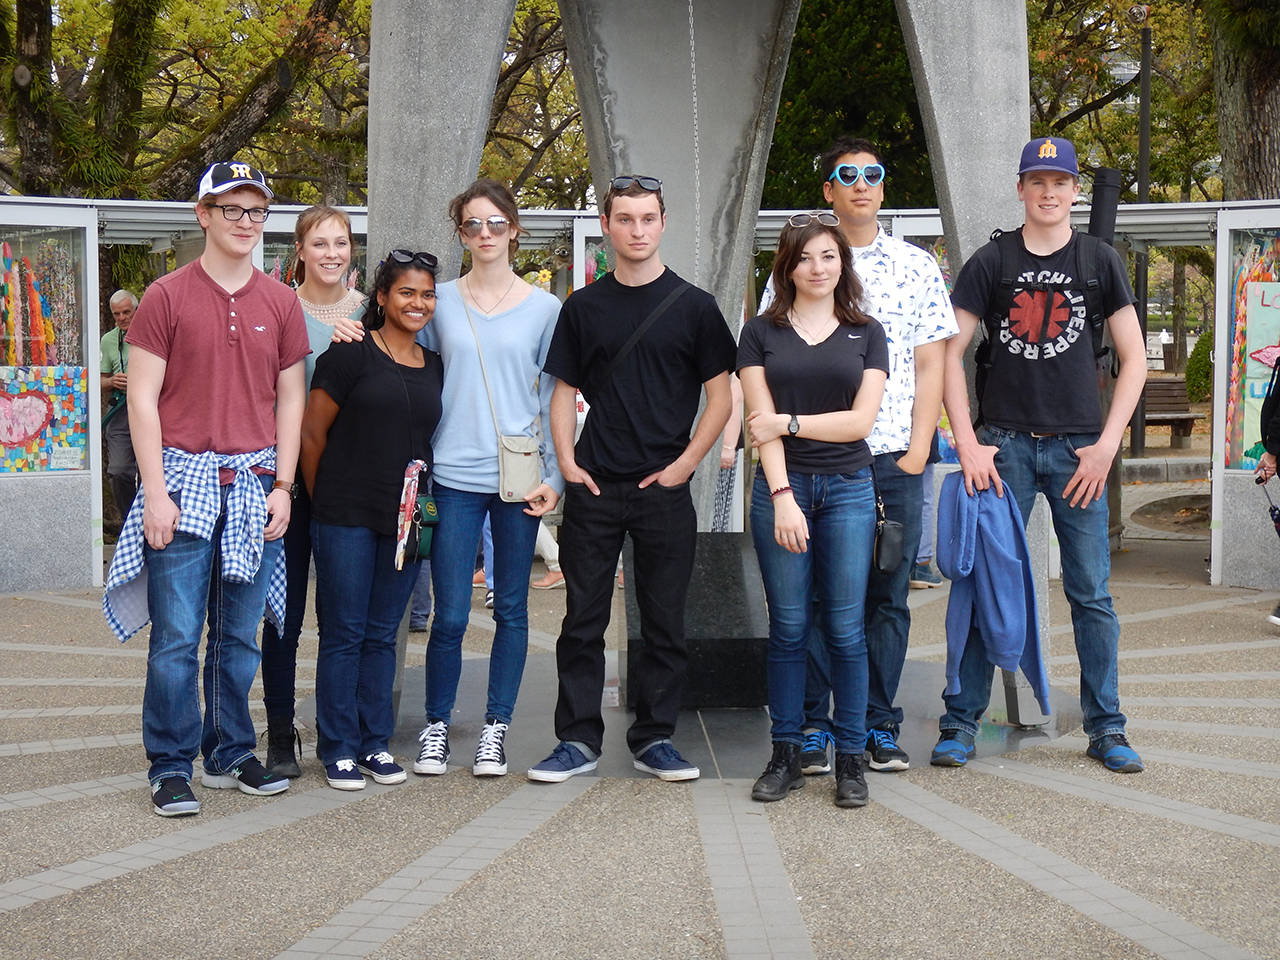 Left to right: McCabe Webb, Anah-Kate Drahn, Ashi Bartolucci, Claire Roberson, Jonathan Doherty, Maria Schwartz, Michael Chesher, and Hayden Simpson in front of the Children’s Peace Monument, Hiroshima.